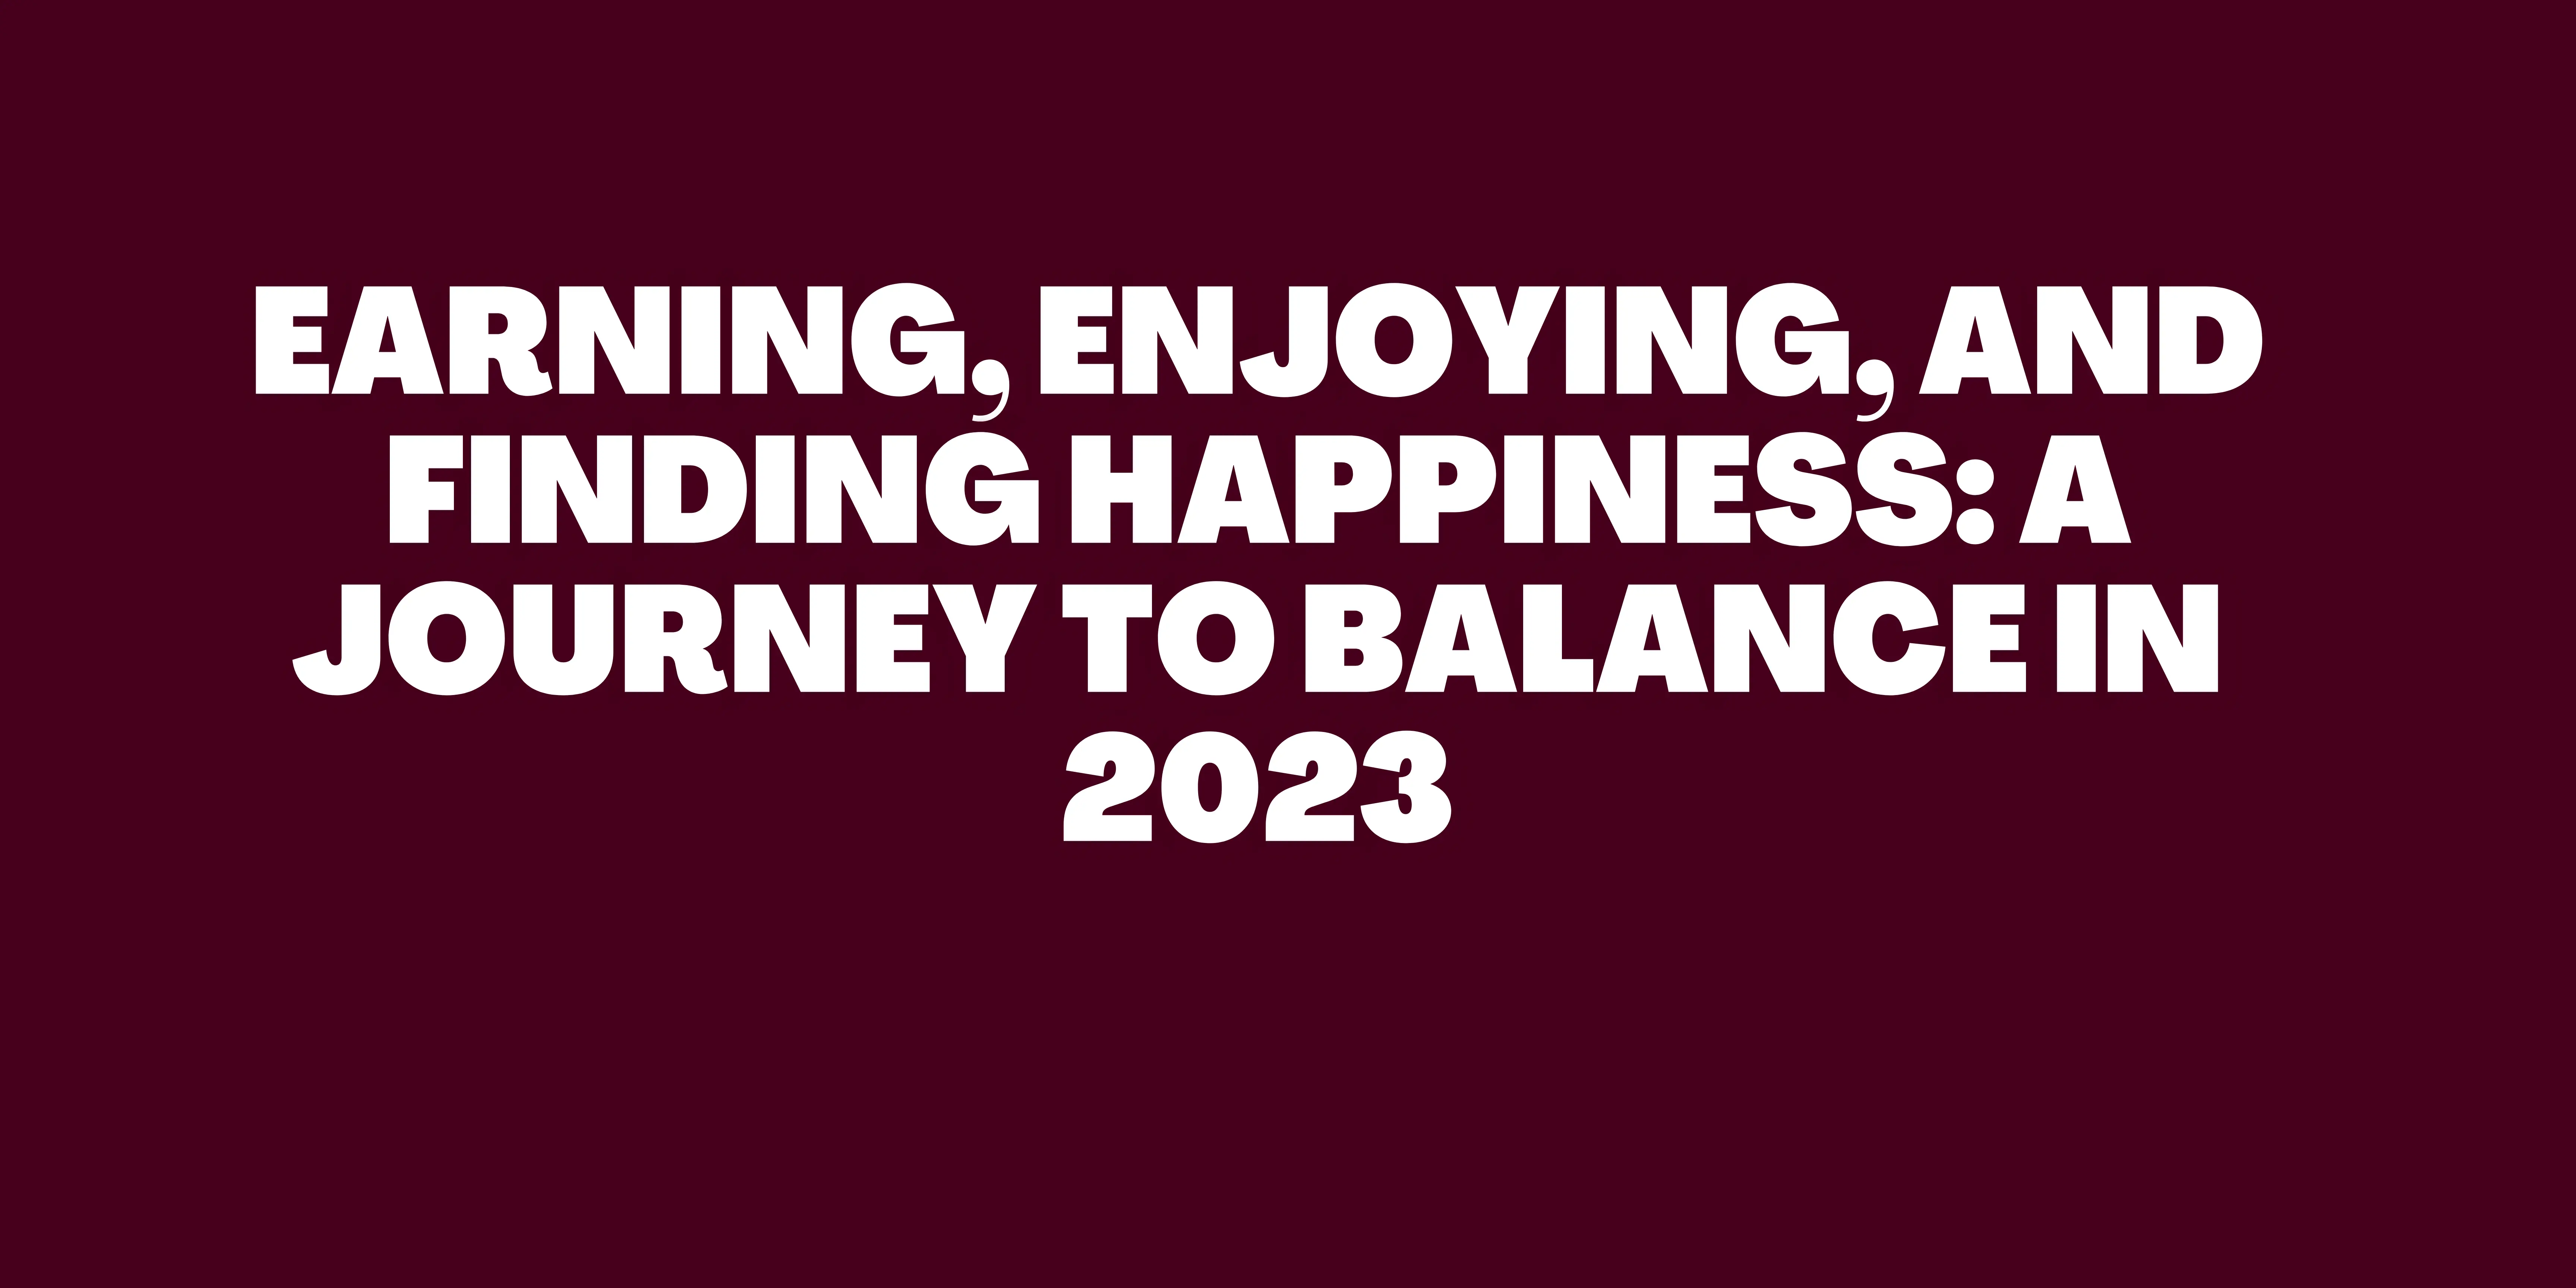 Earning, Enjoying, and Finding Happiness: A Journey to Balance in 2023